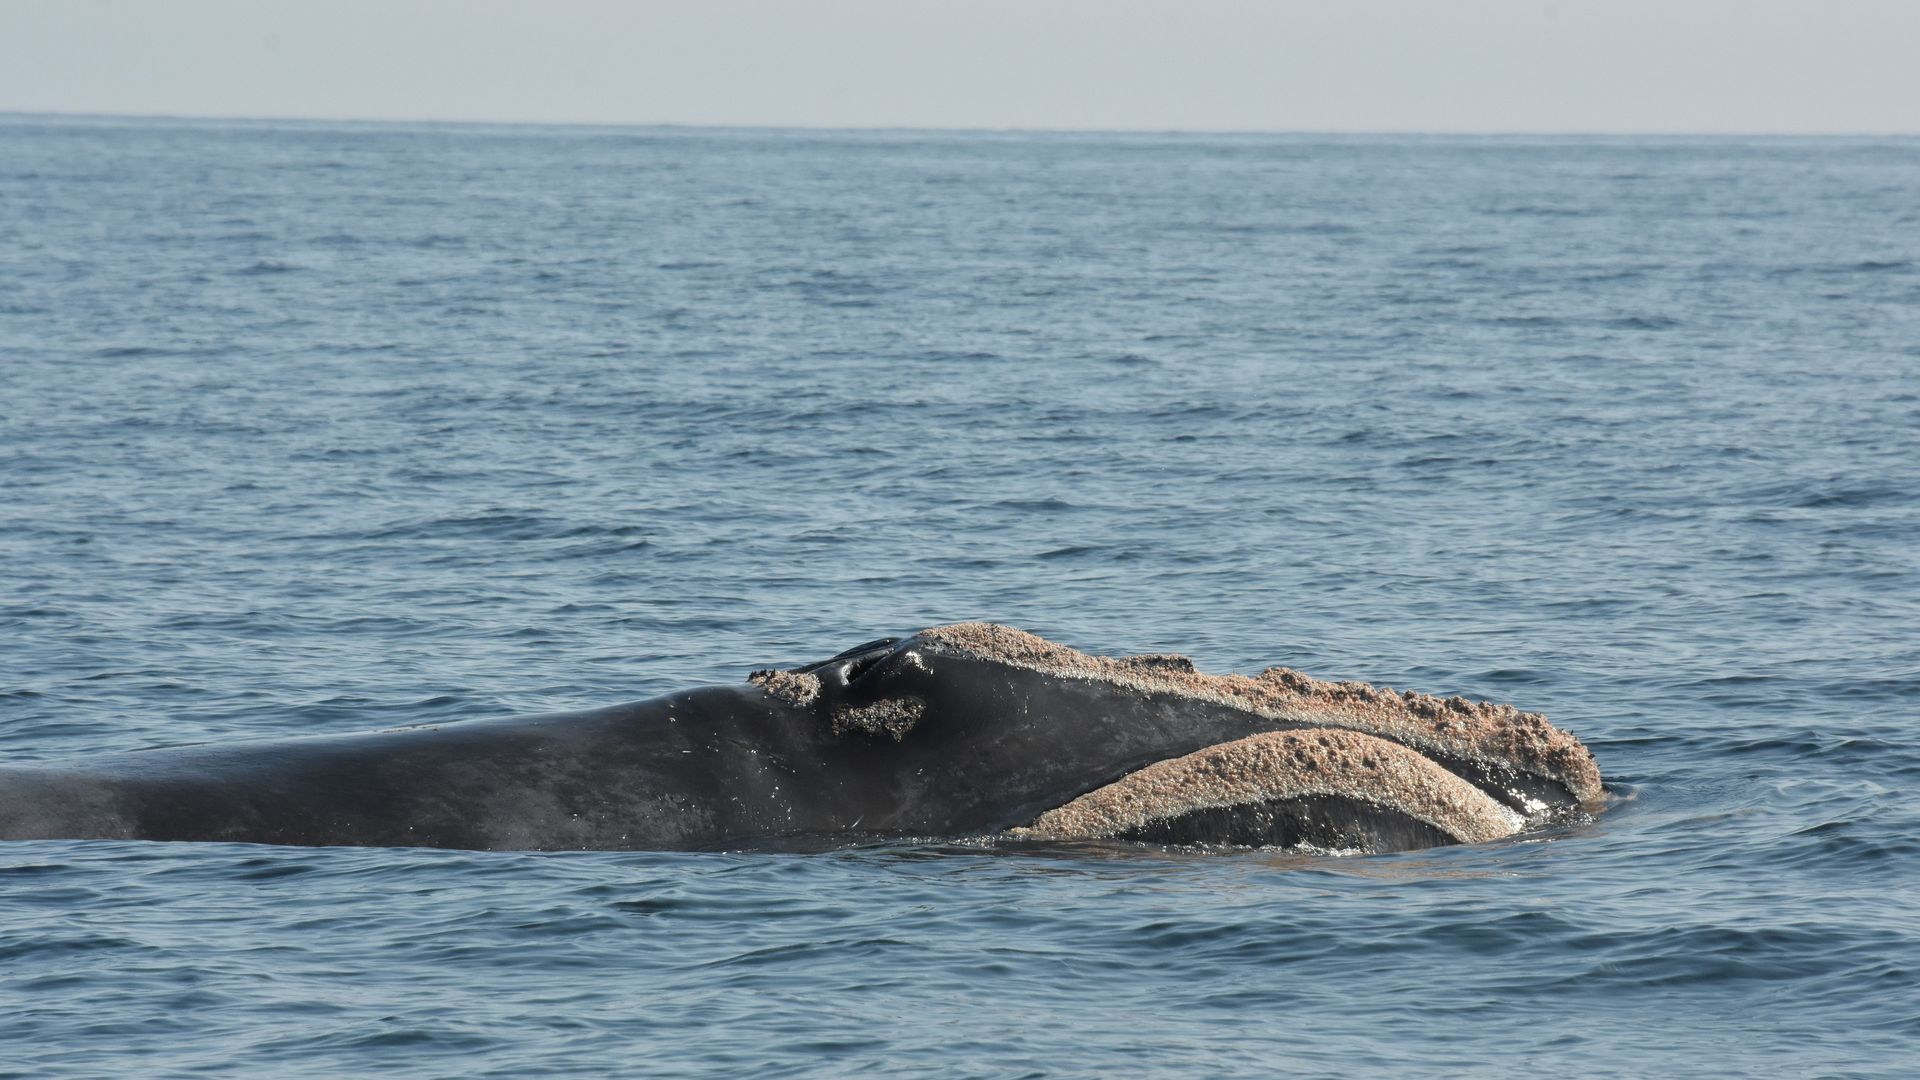 New England Aquarium names new group of North Atlantic right whales ...